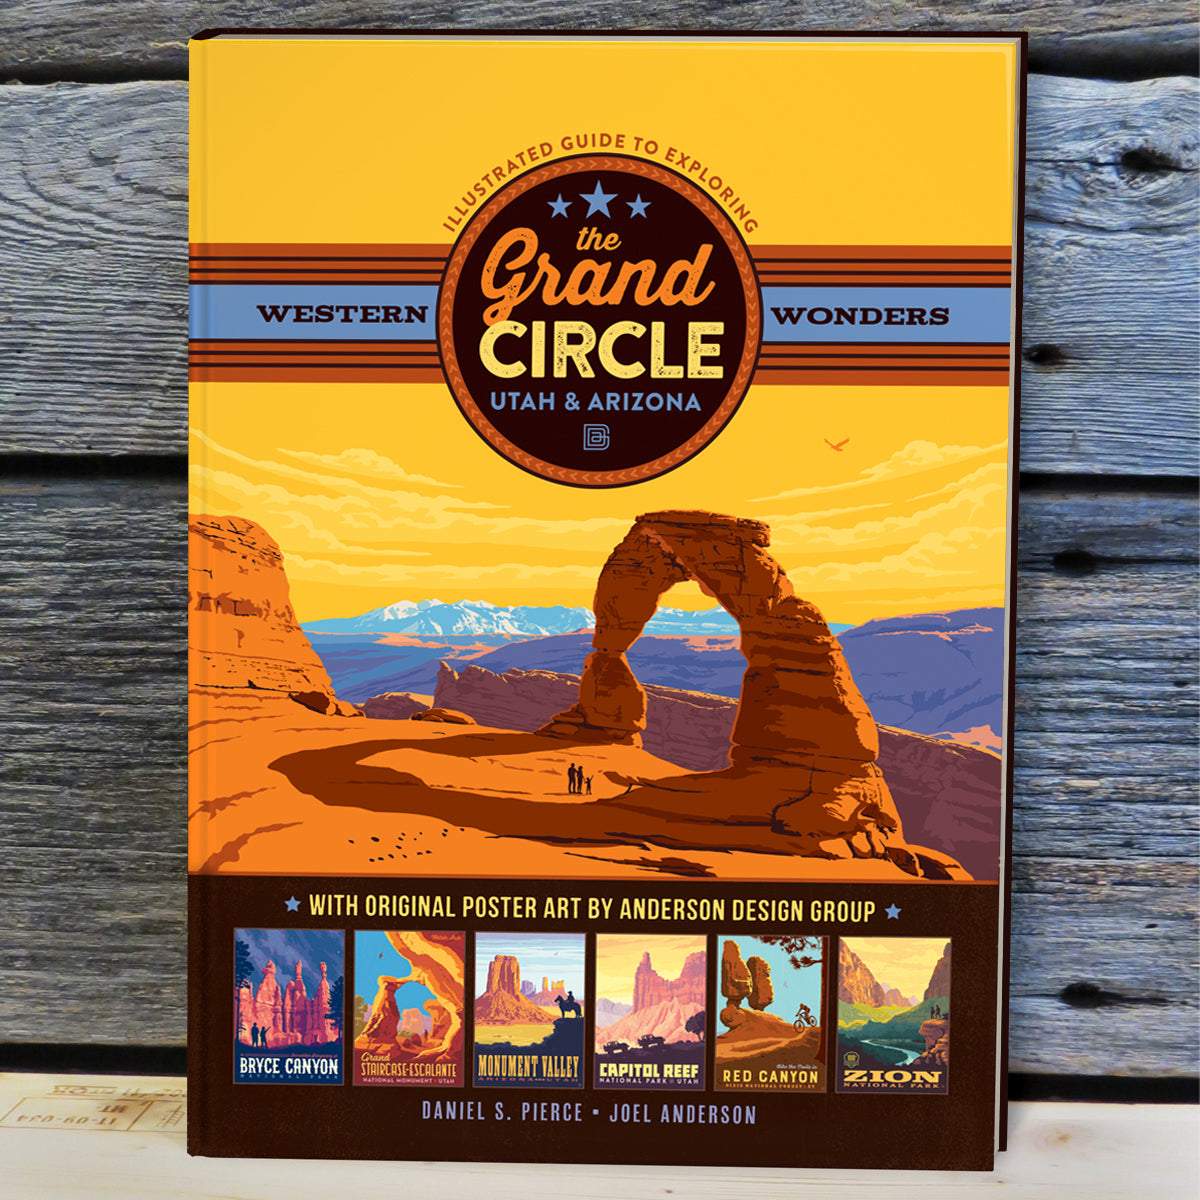 Team ADG Introduces the 2021 Illustrated Guide to the Grand Circle!